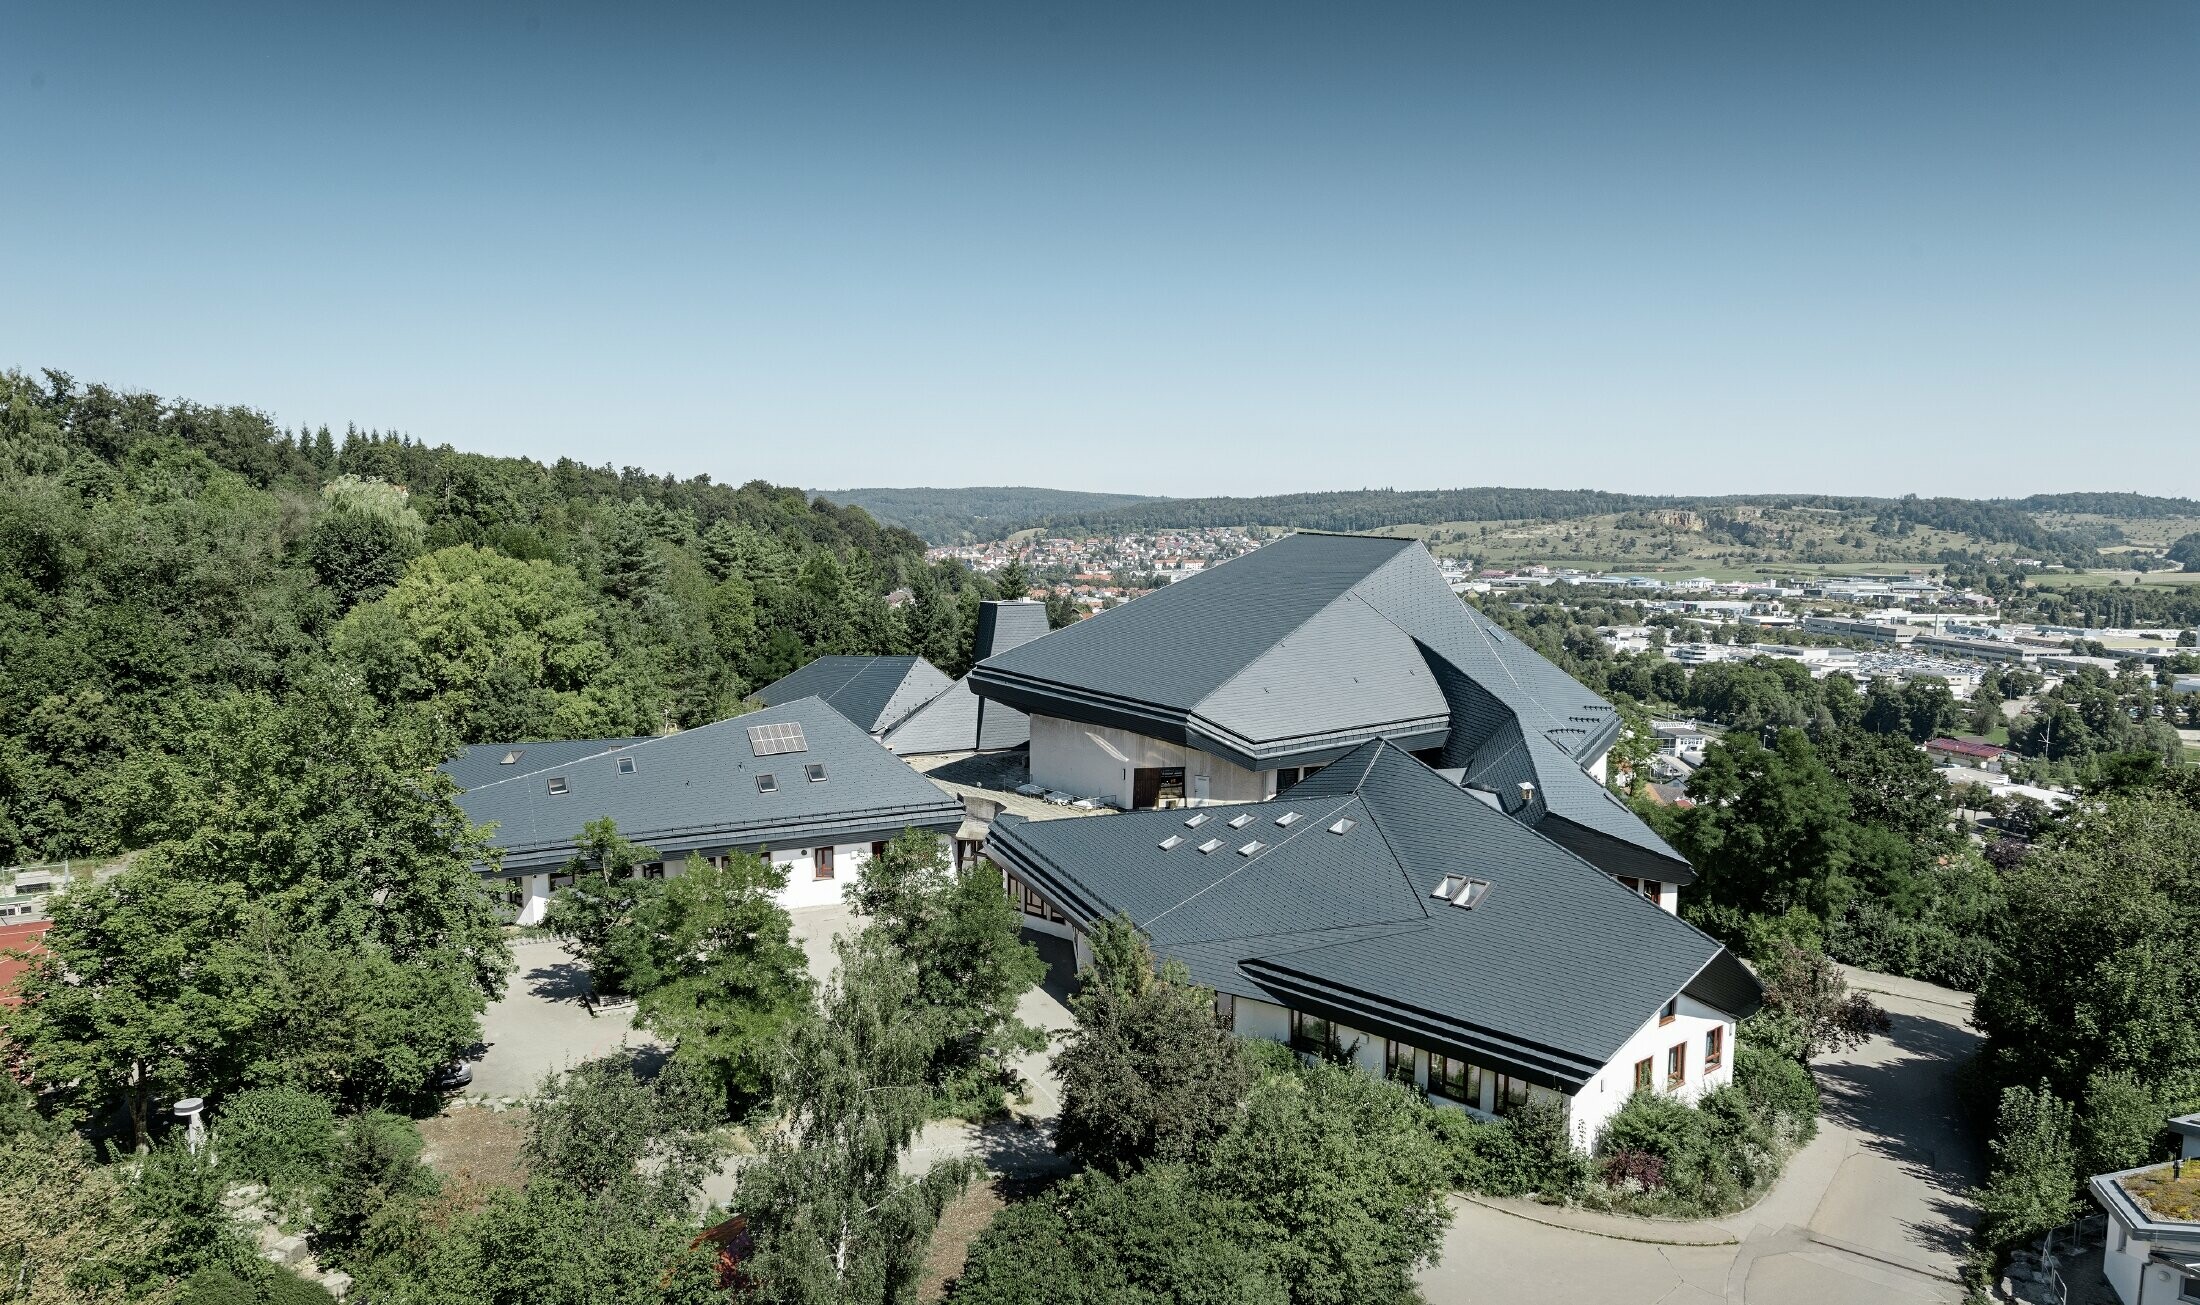 Waldorf school in Heidenheim (Germany) with a newly renovated roof. The large roof surface with its many angles and roof pitches was covered with PREFA shingle in anthracite